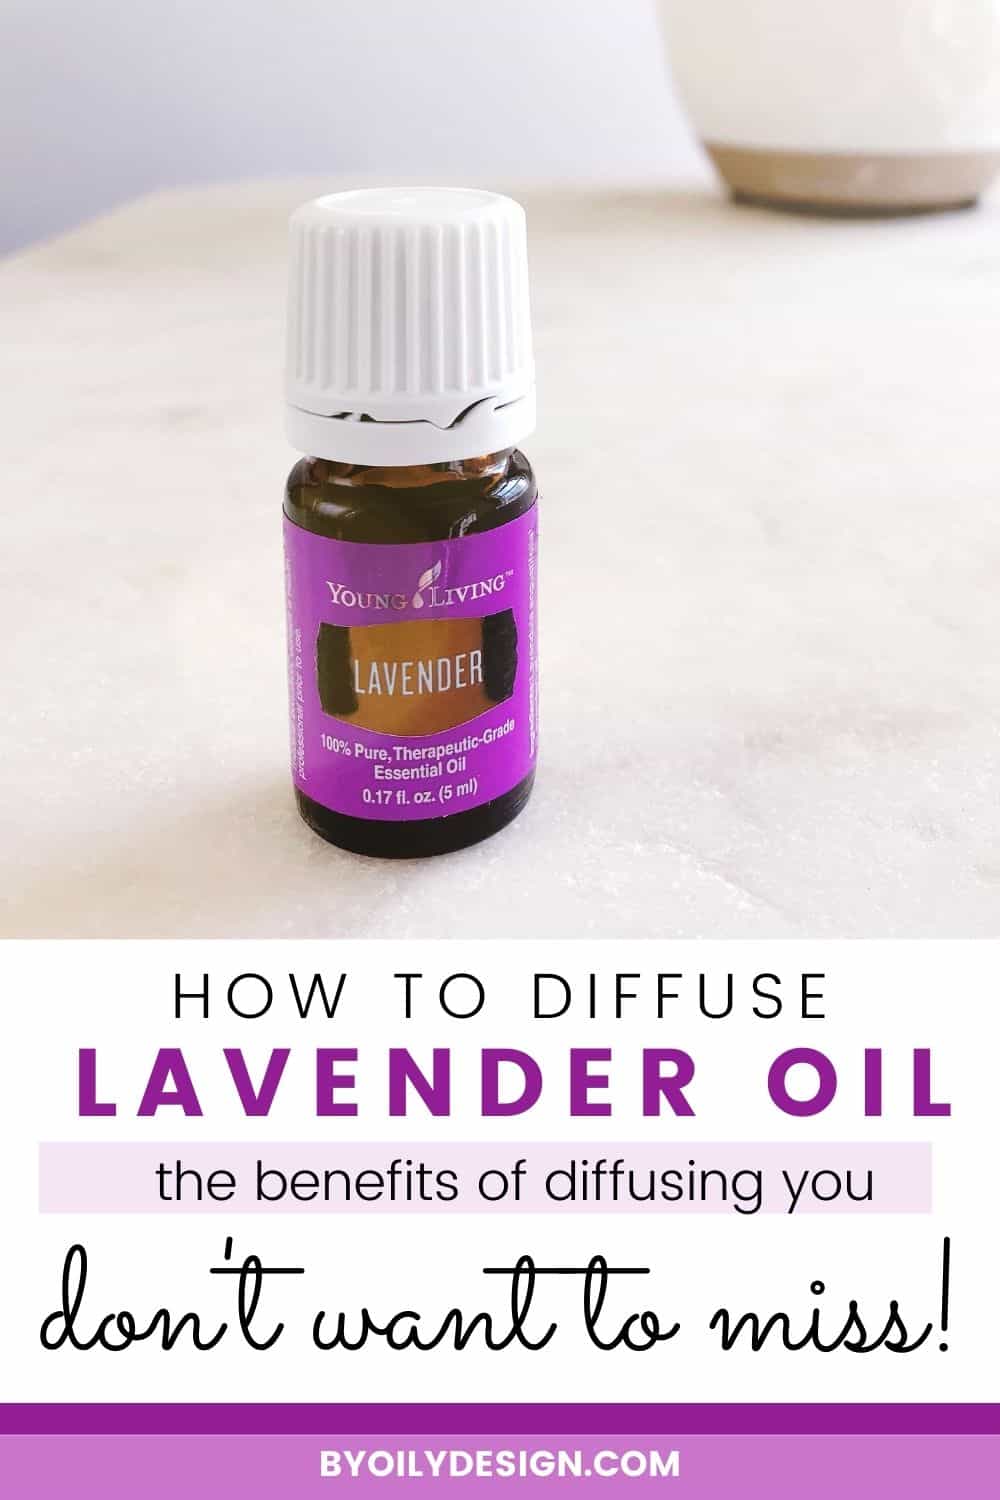 Benefits Of Diffusing Lavender Essential Oil By Oily Design